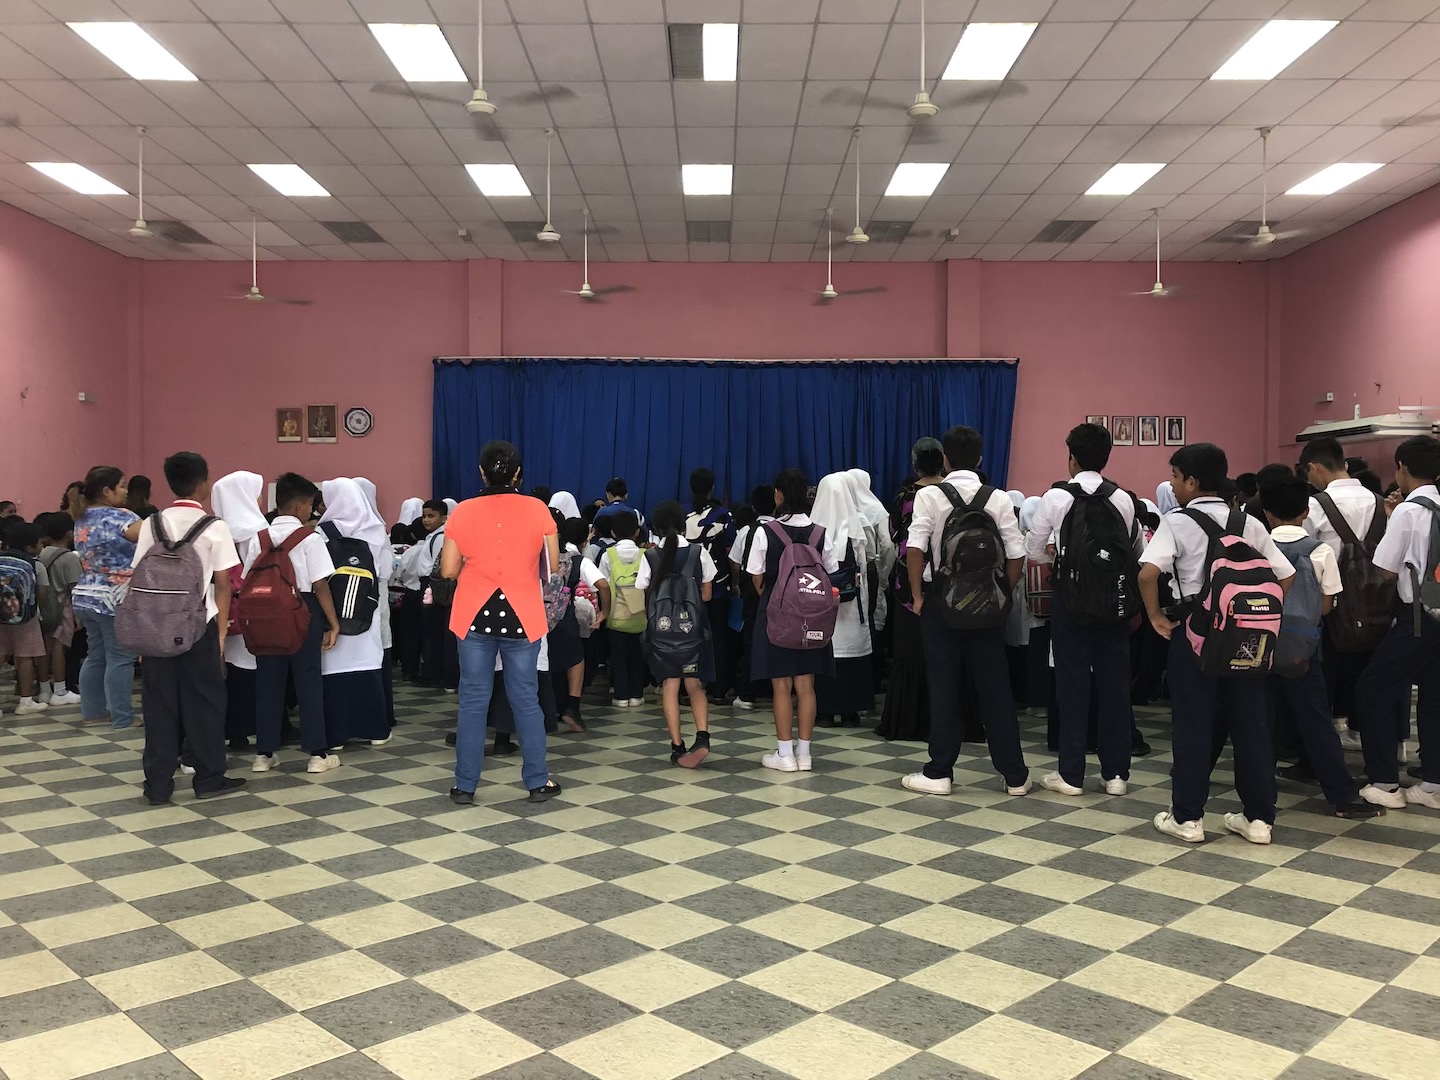 Some of the churches in Klang have opened their doors to the refugees living among them. ElShaddai Refugee Learning Centre has been running a primary school on the premises of St Barnabas Church since 2008.